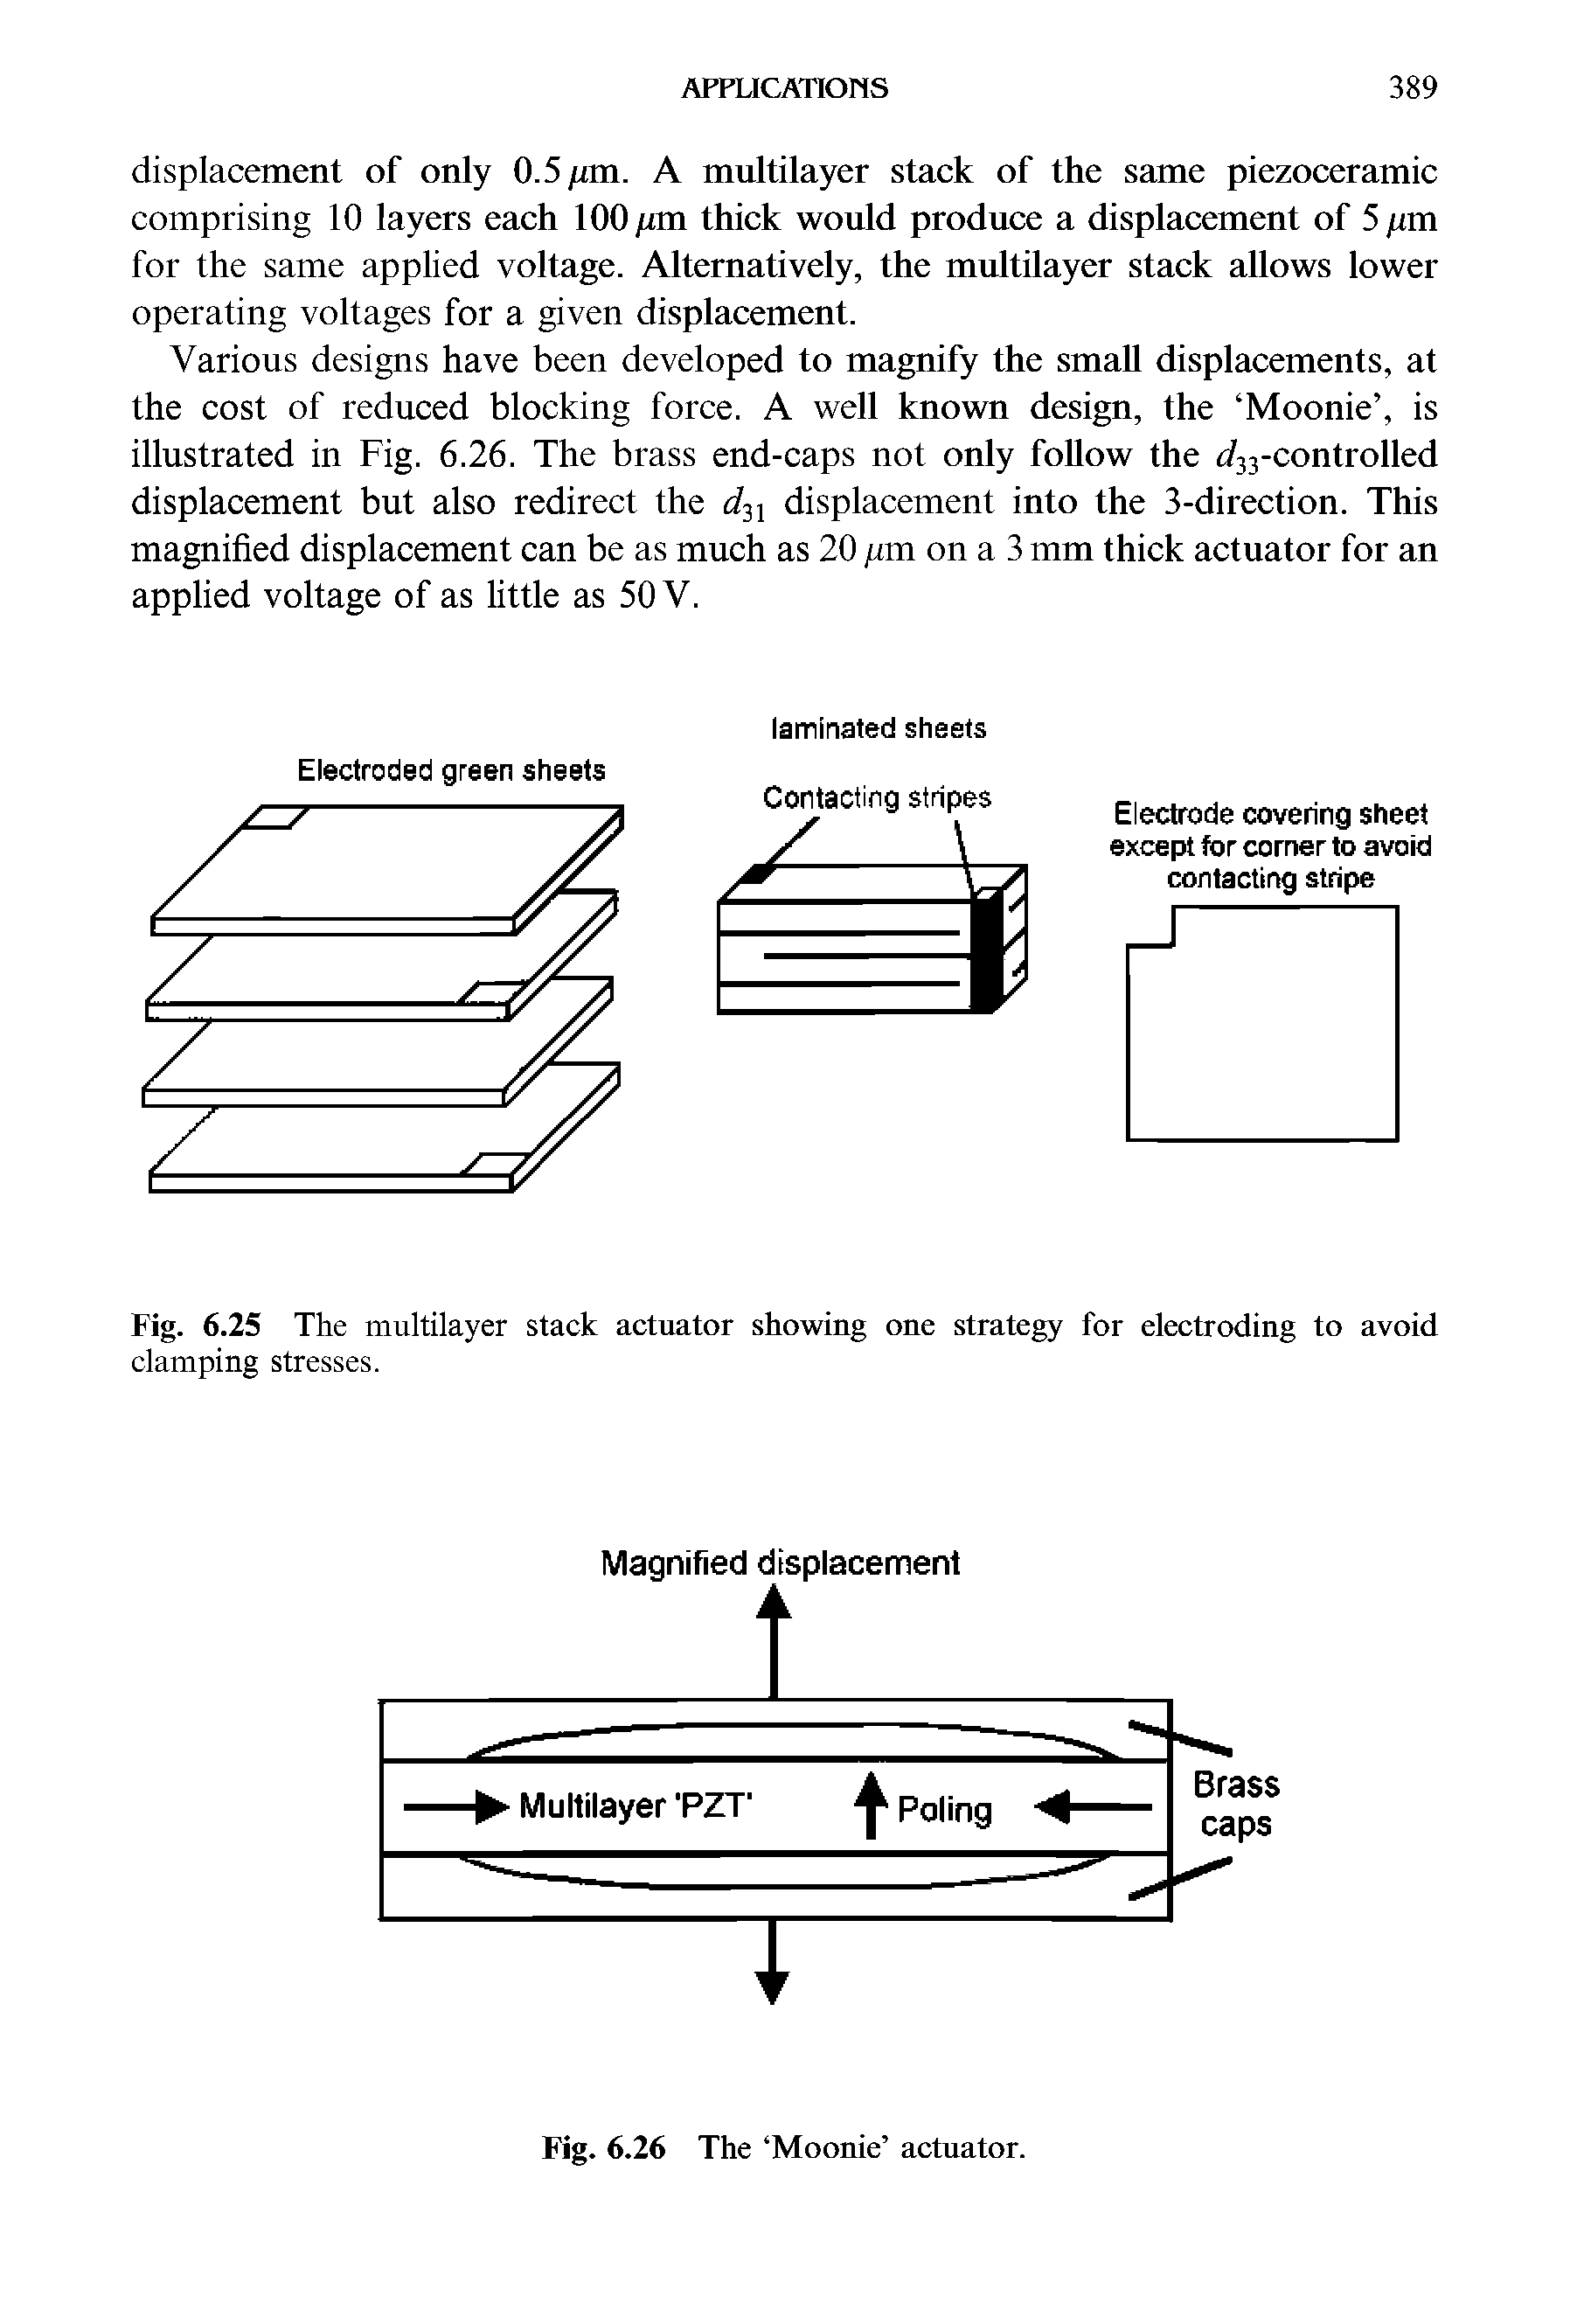 Fig. 6.25 The multilayer stack actuator showing one strategy for electroding to avoid clamping stresses.